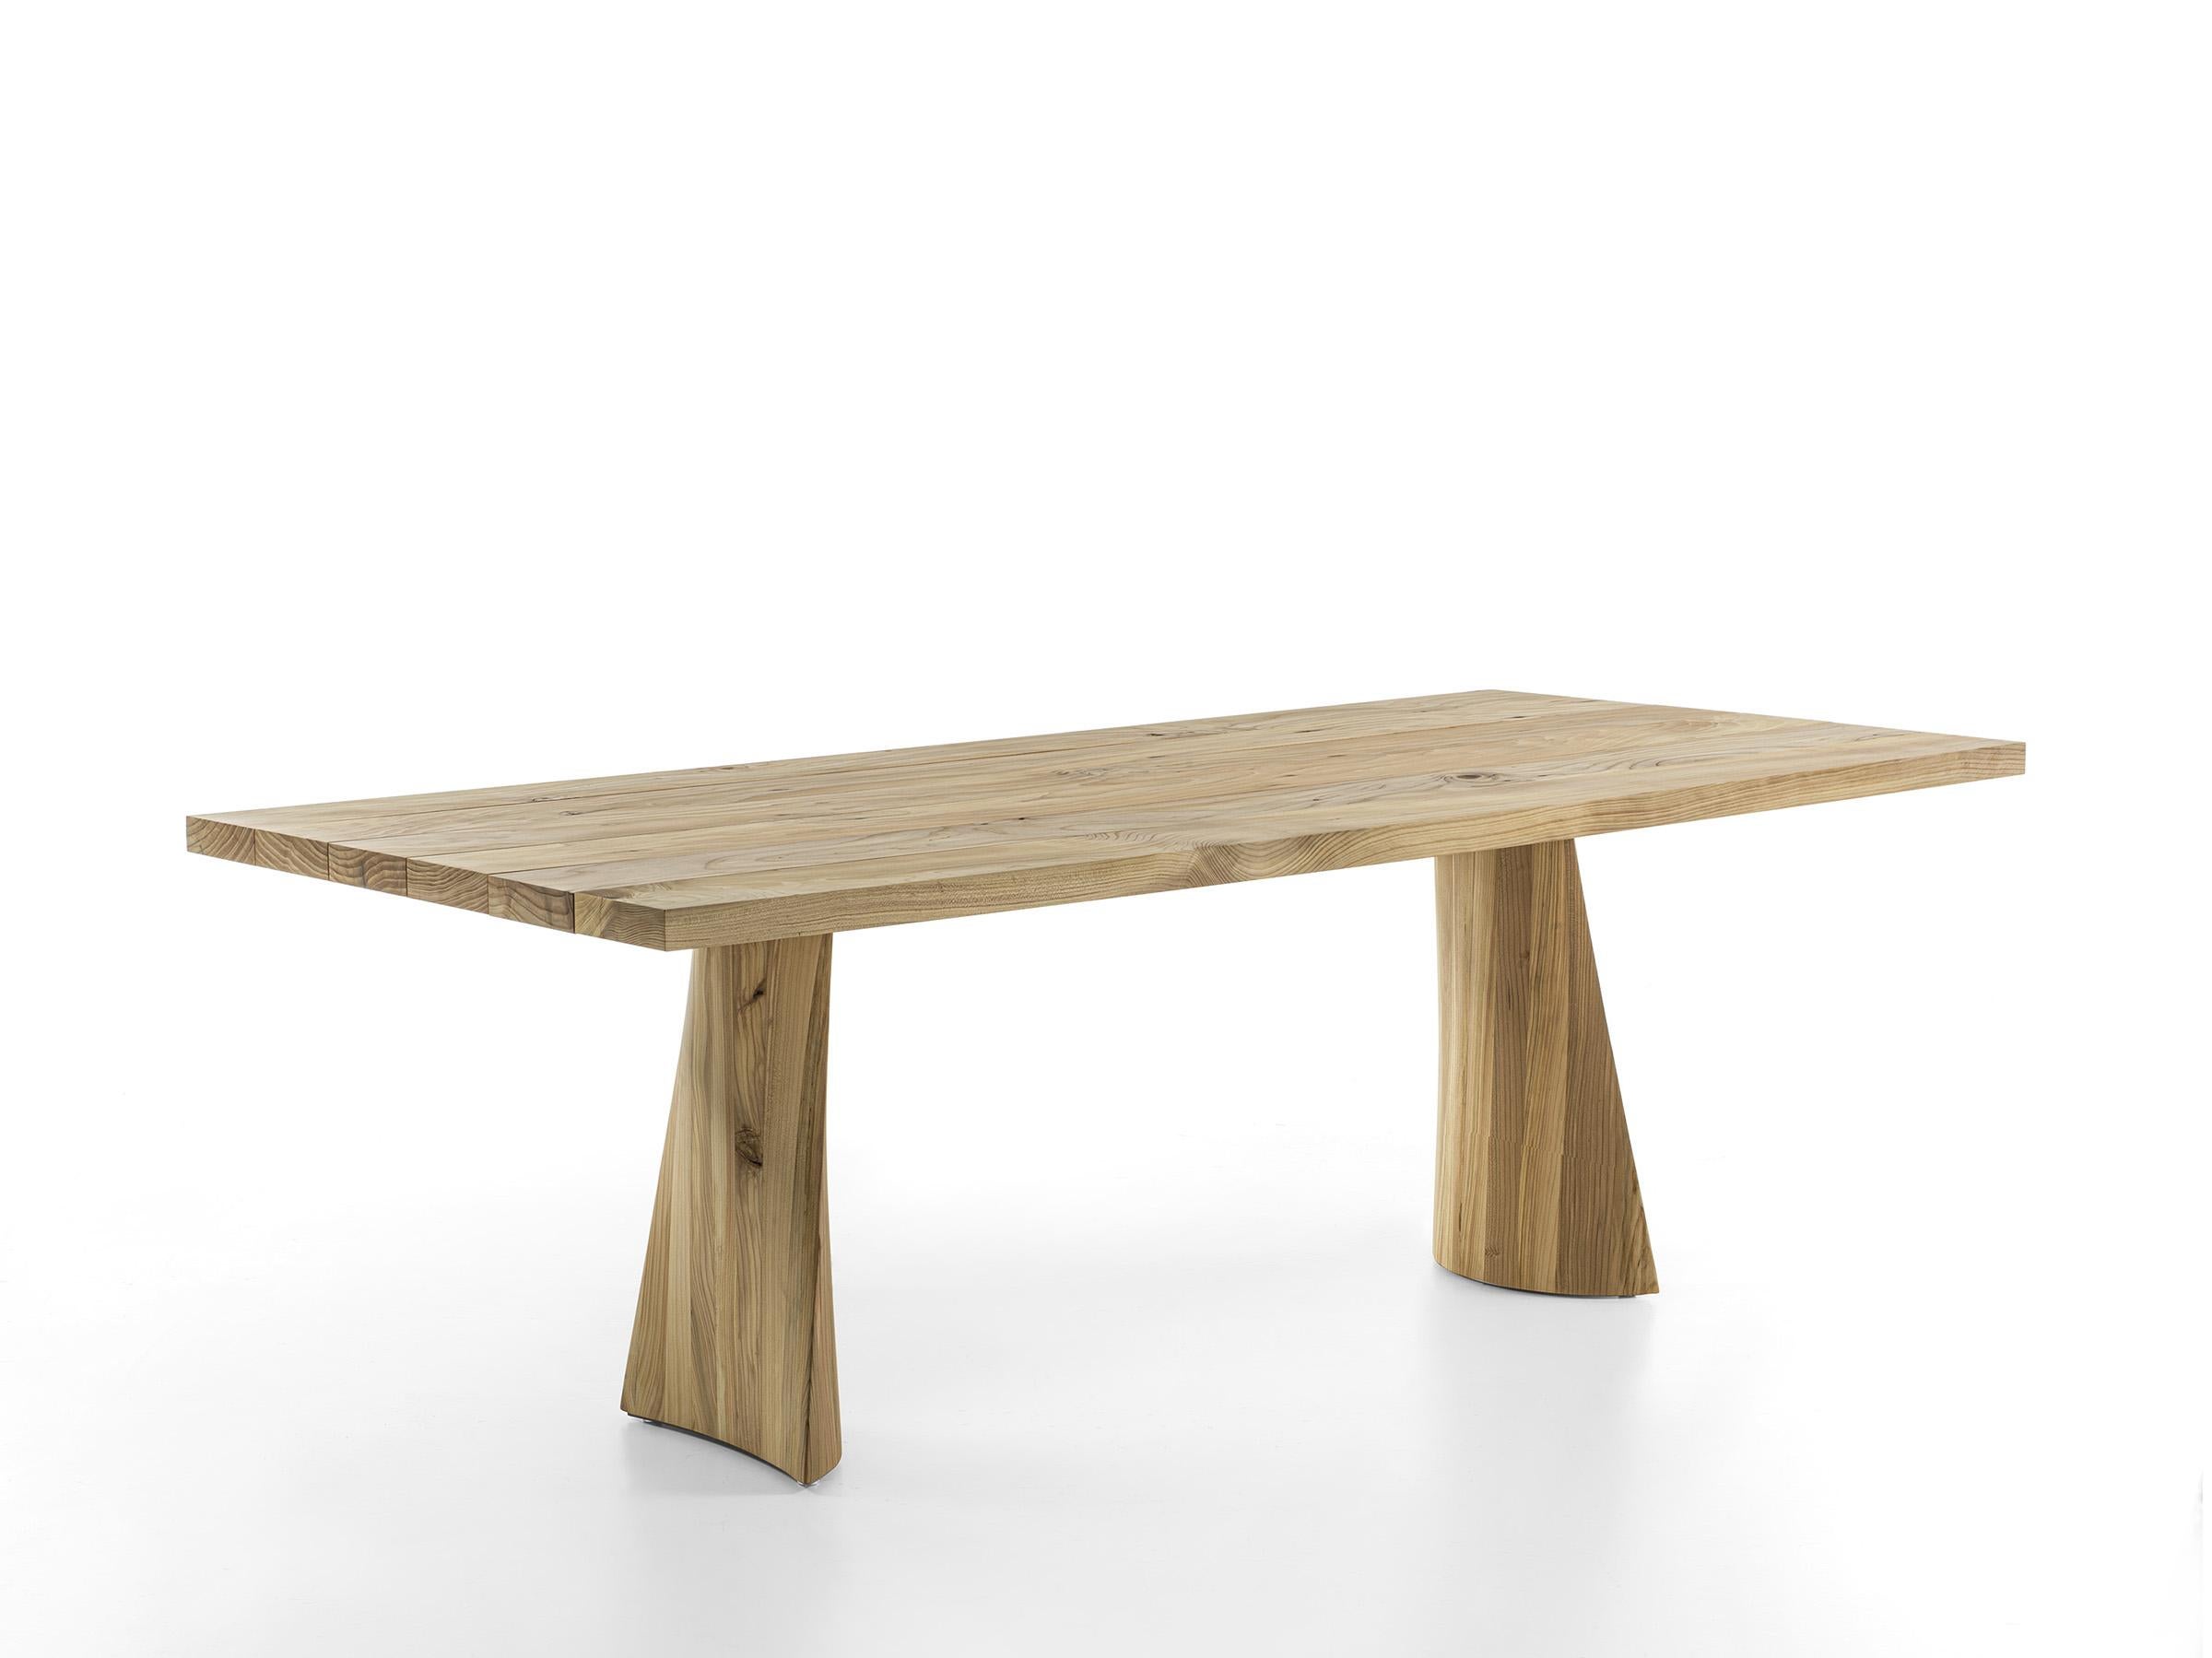 Italian Outdoor Scented Cedar Wood Dining Table by Riva 1920 For Sale